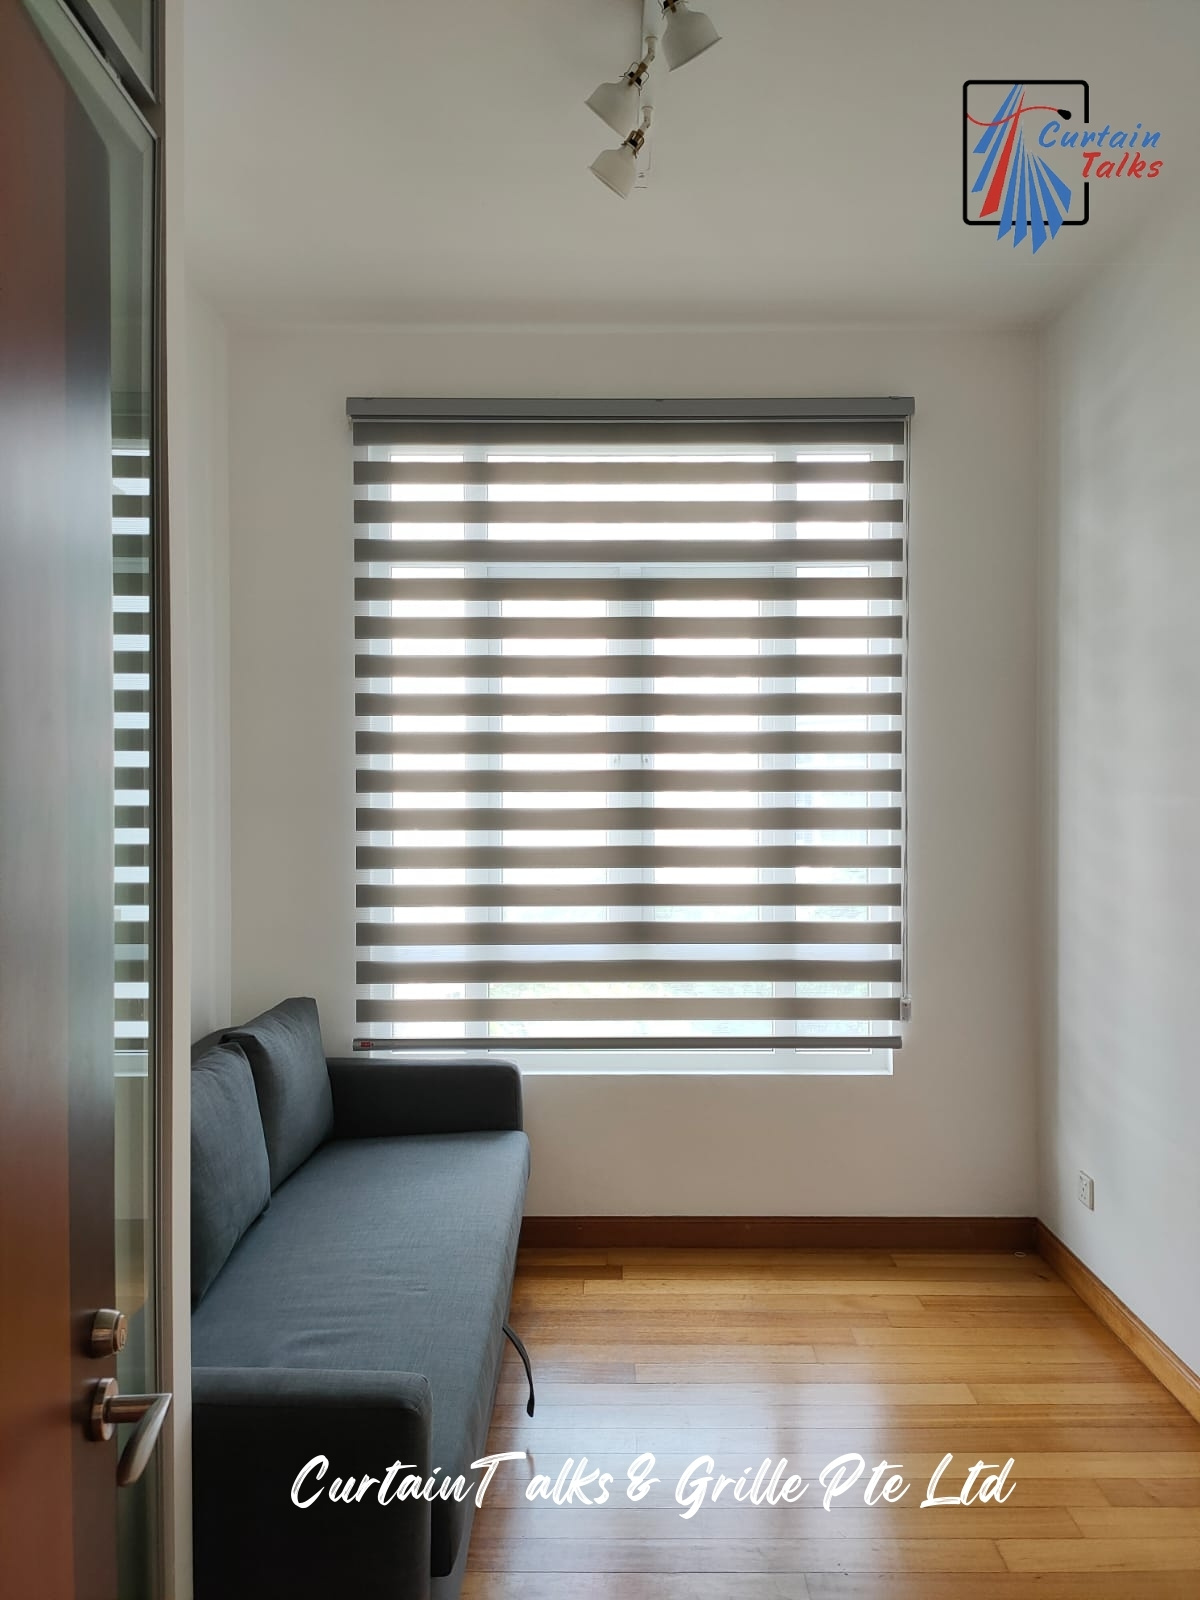 This is a Picture of Dimmer Korean combi Blinds at Singapore 100 Robertson Quay